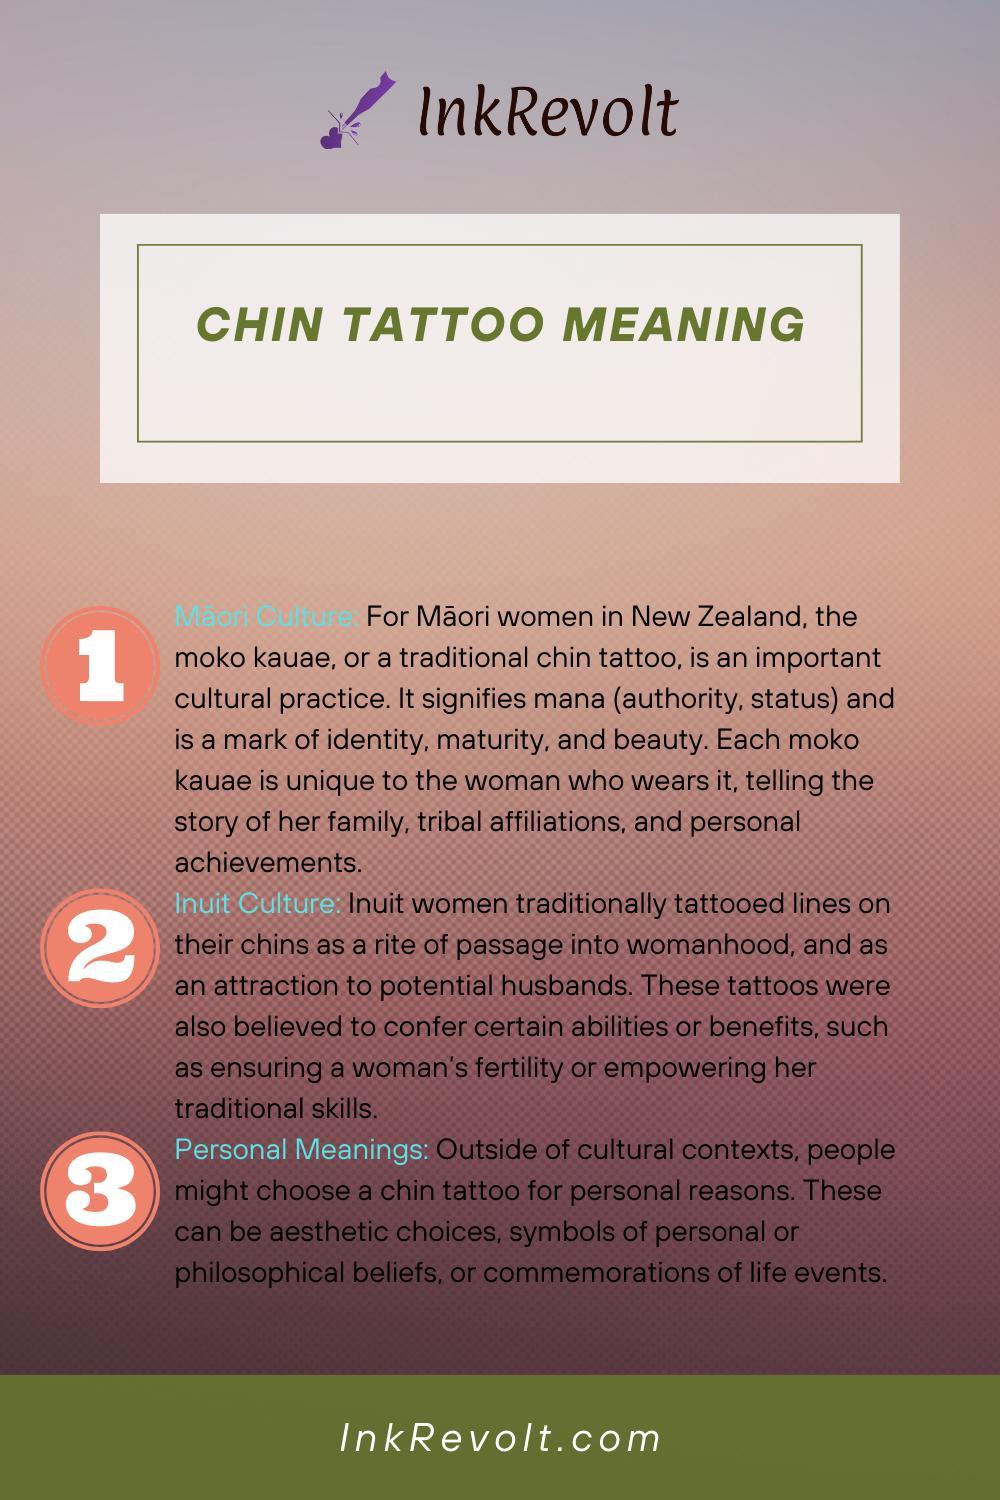 Chin Tattoo Meaning